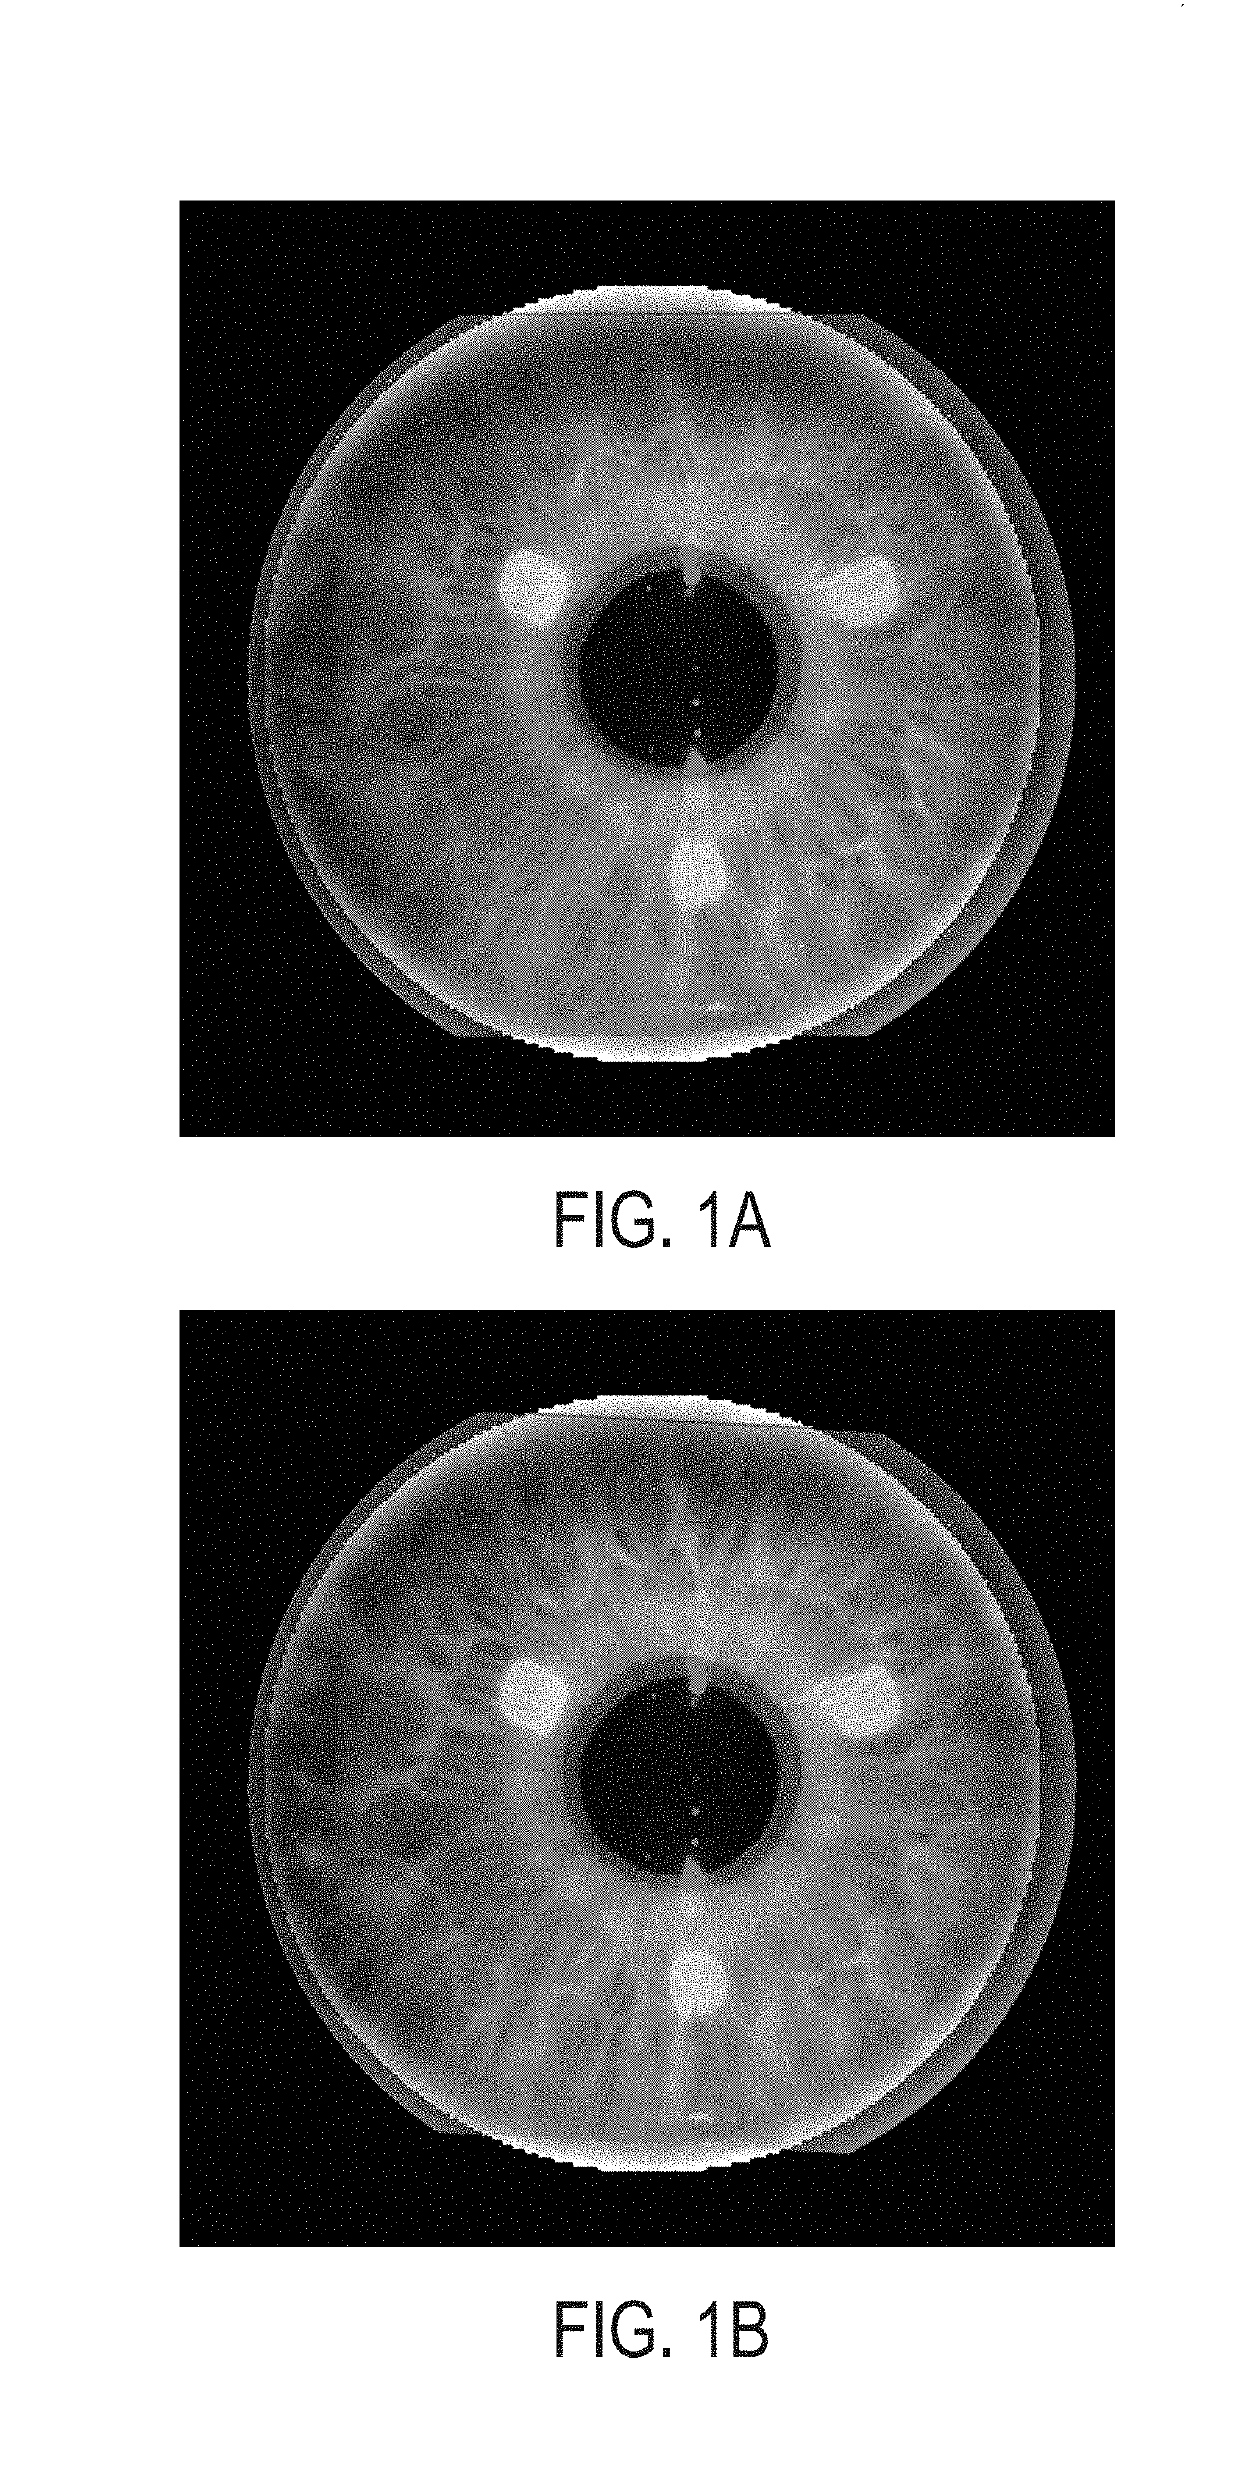 Overlay imaging for registration of a patient eye for laser surgery